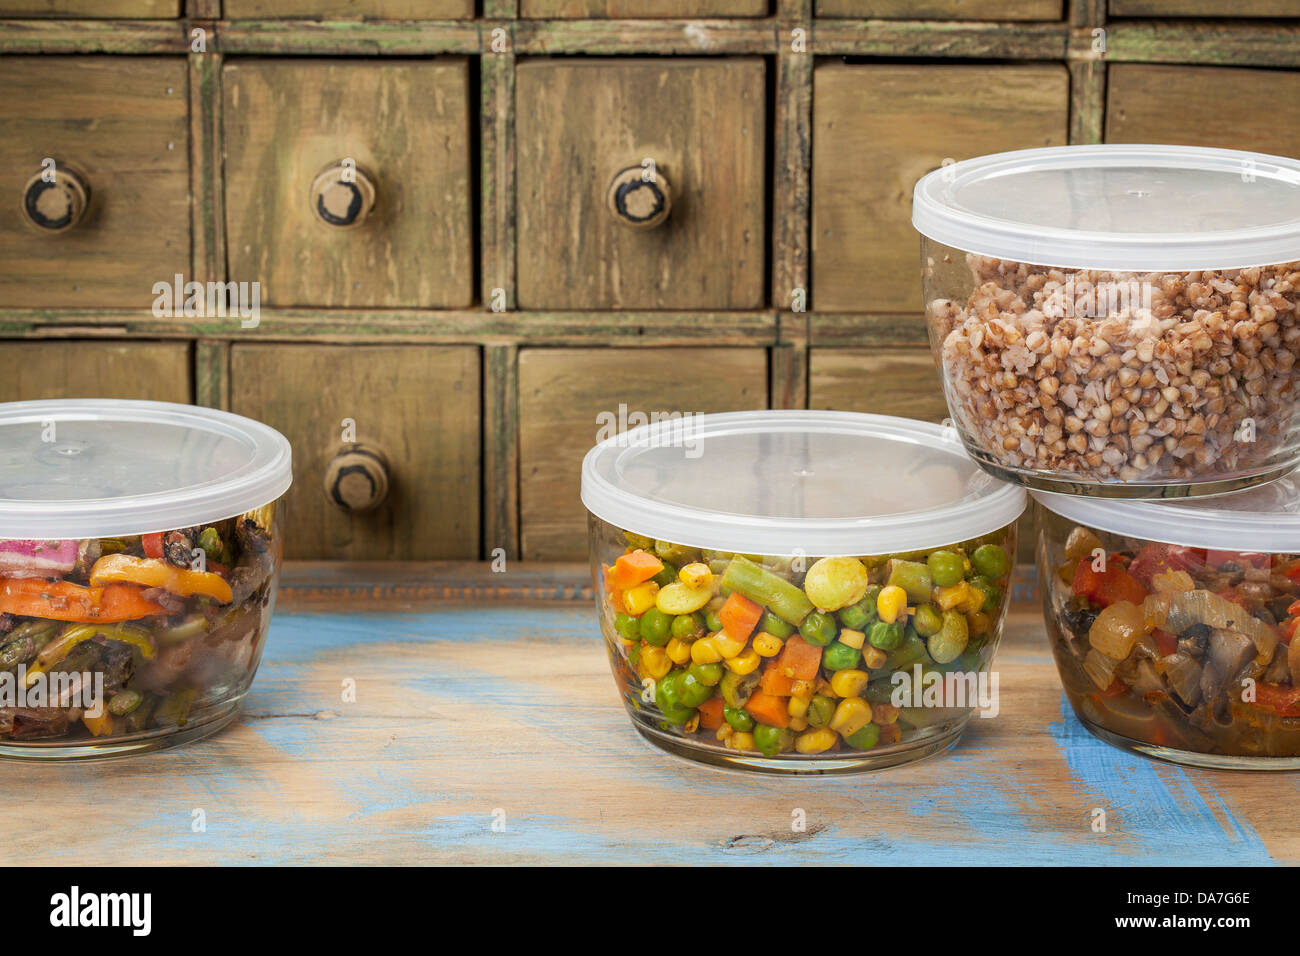 dinner leftovers (buckwheat kasha, vegetables, stir fry) in glass containers with drawer cabinet in background Stock Photo